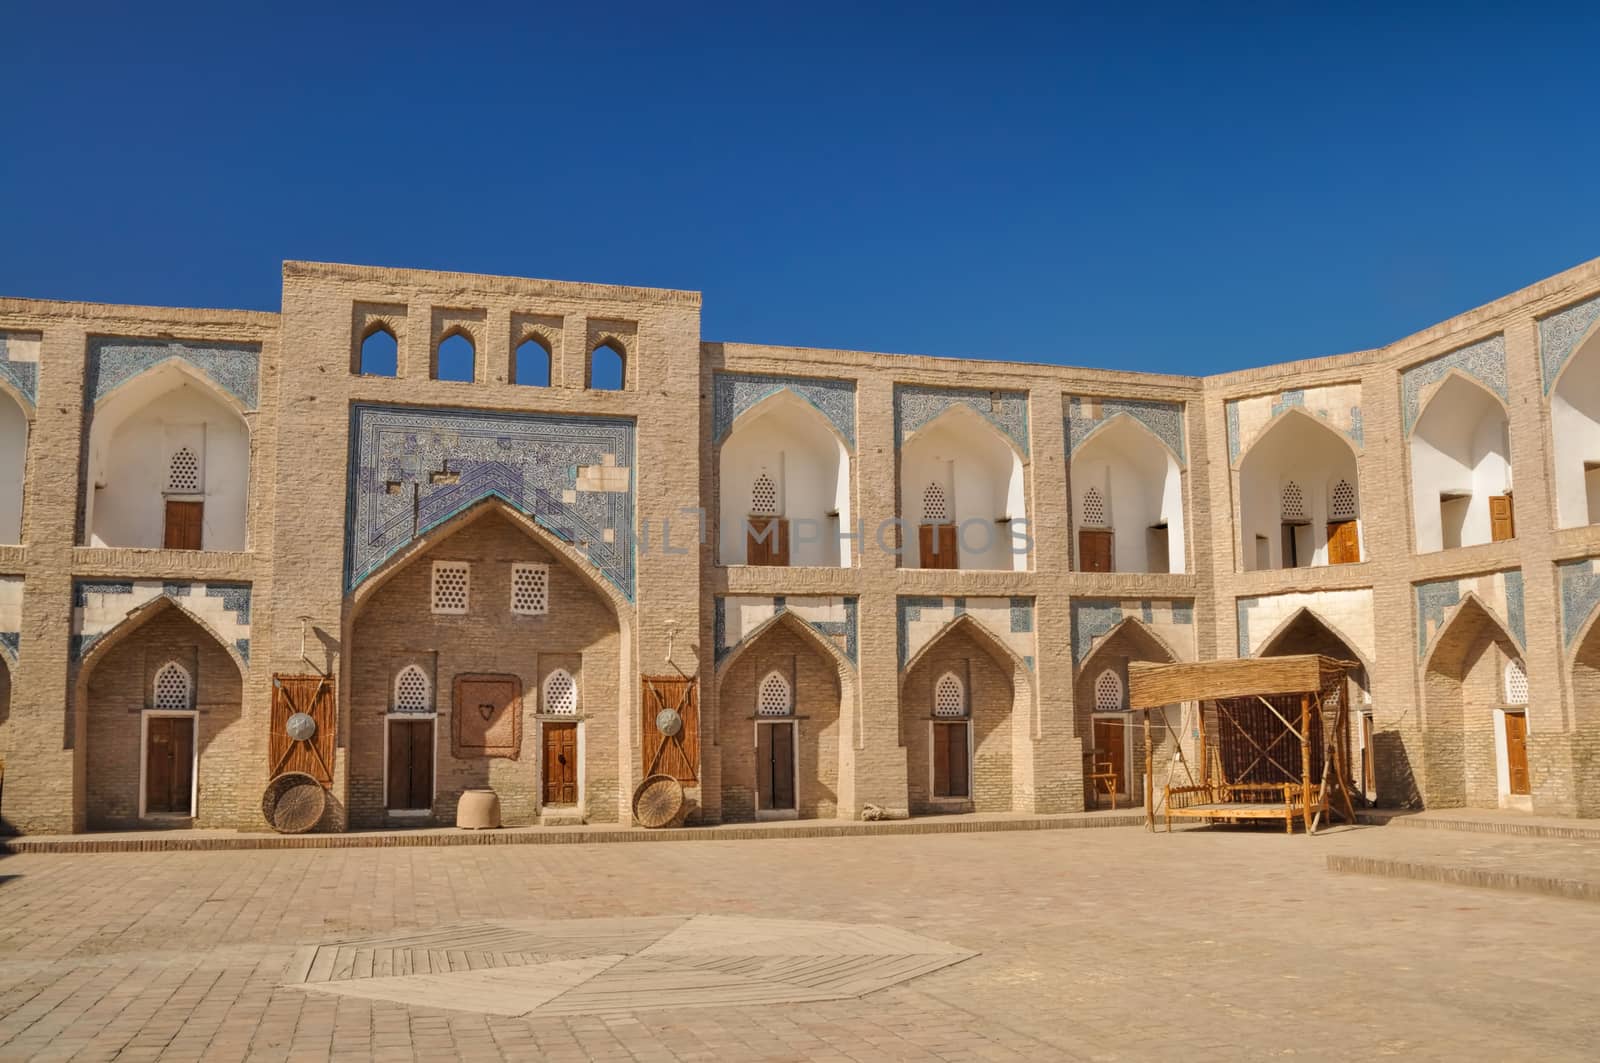 Square in old town in Khiva, historic site and tourist destination in Uzbekistan